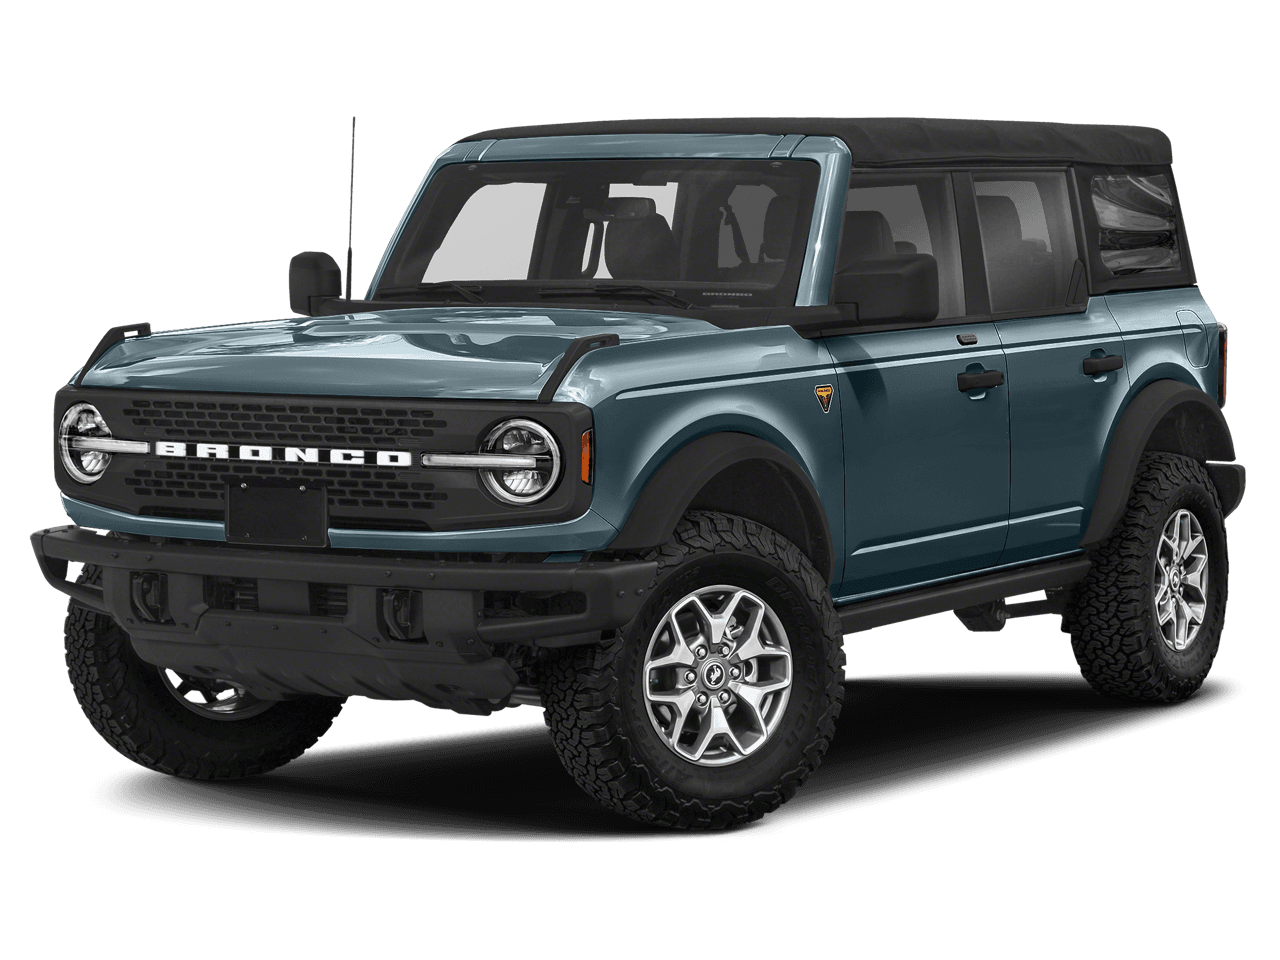 2021 Ford Bronco Photo in Bethesda, MD 20814